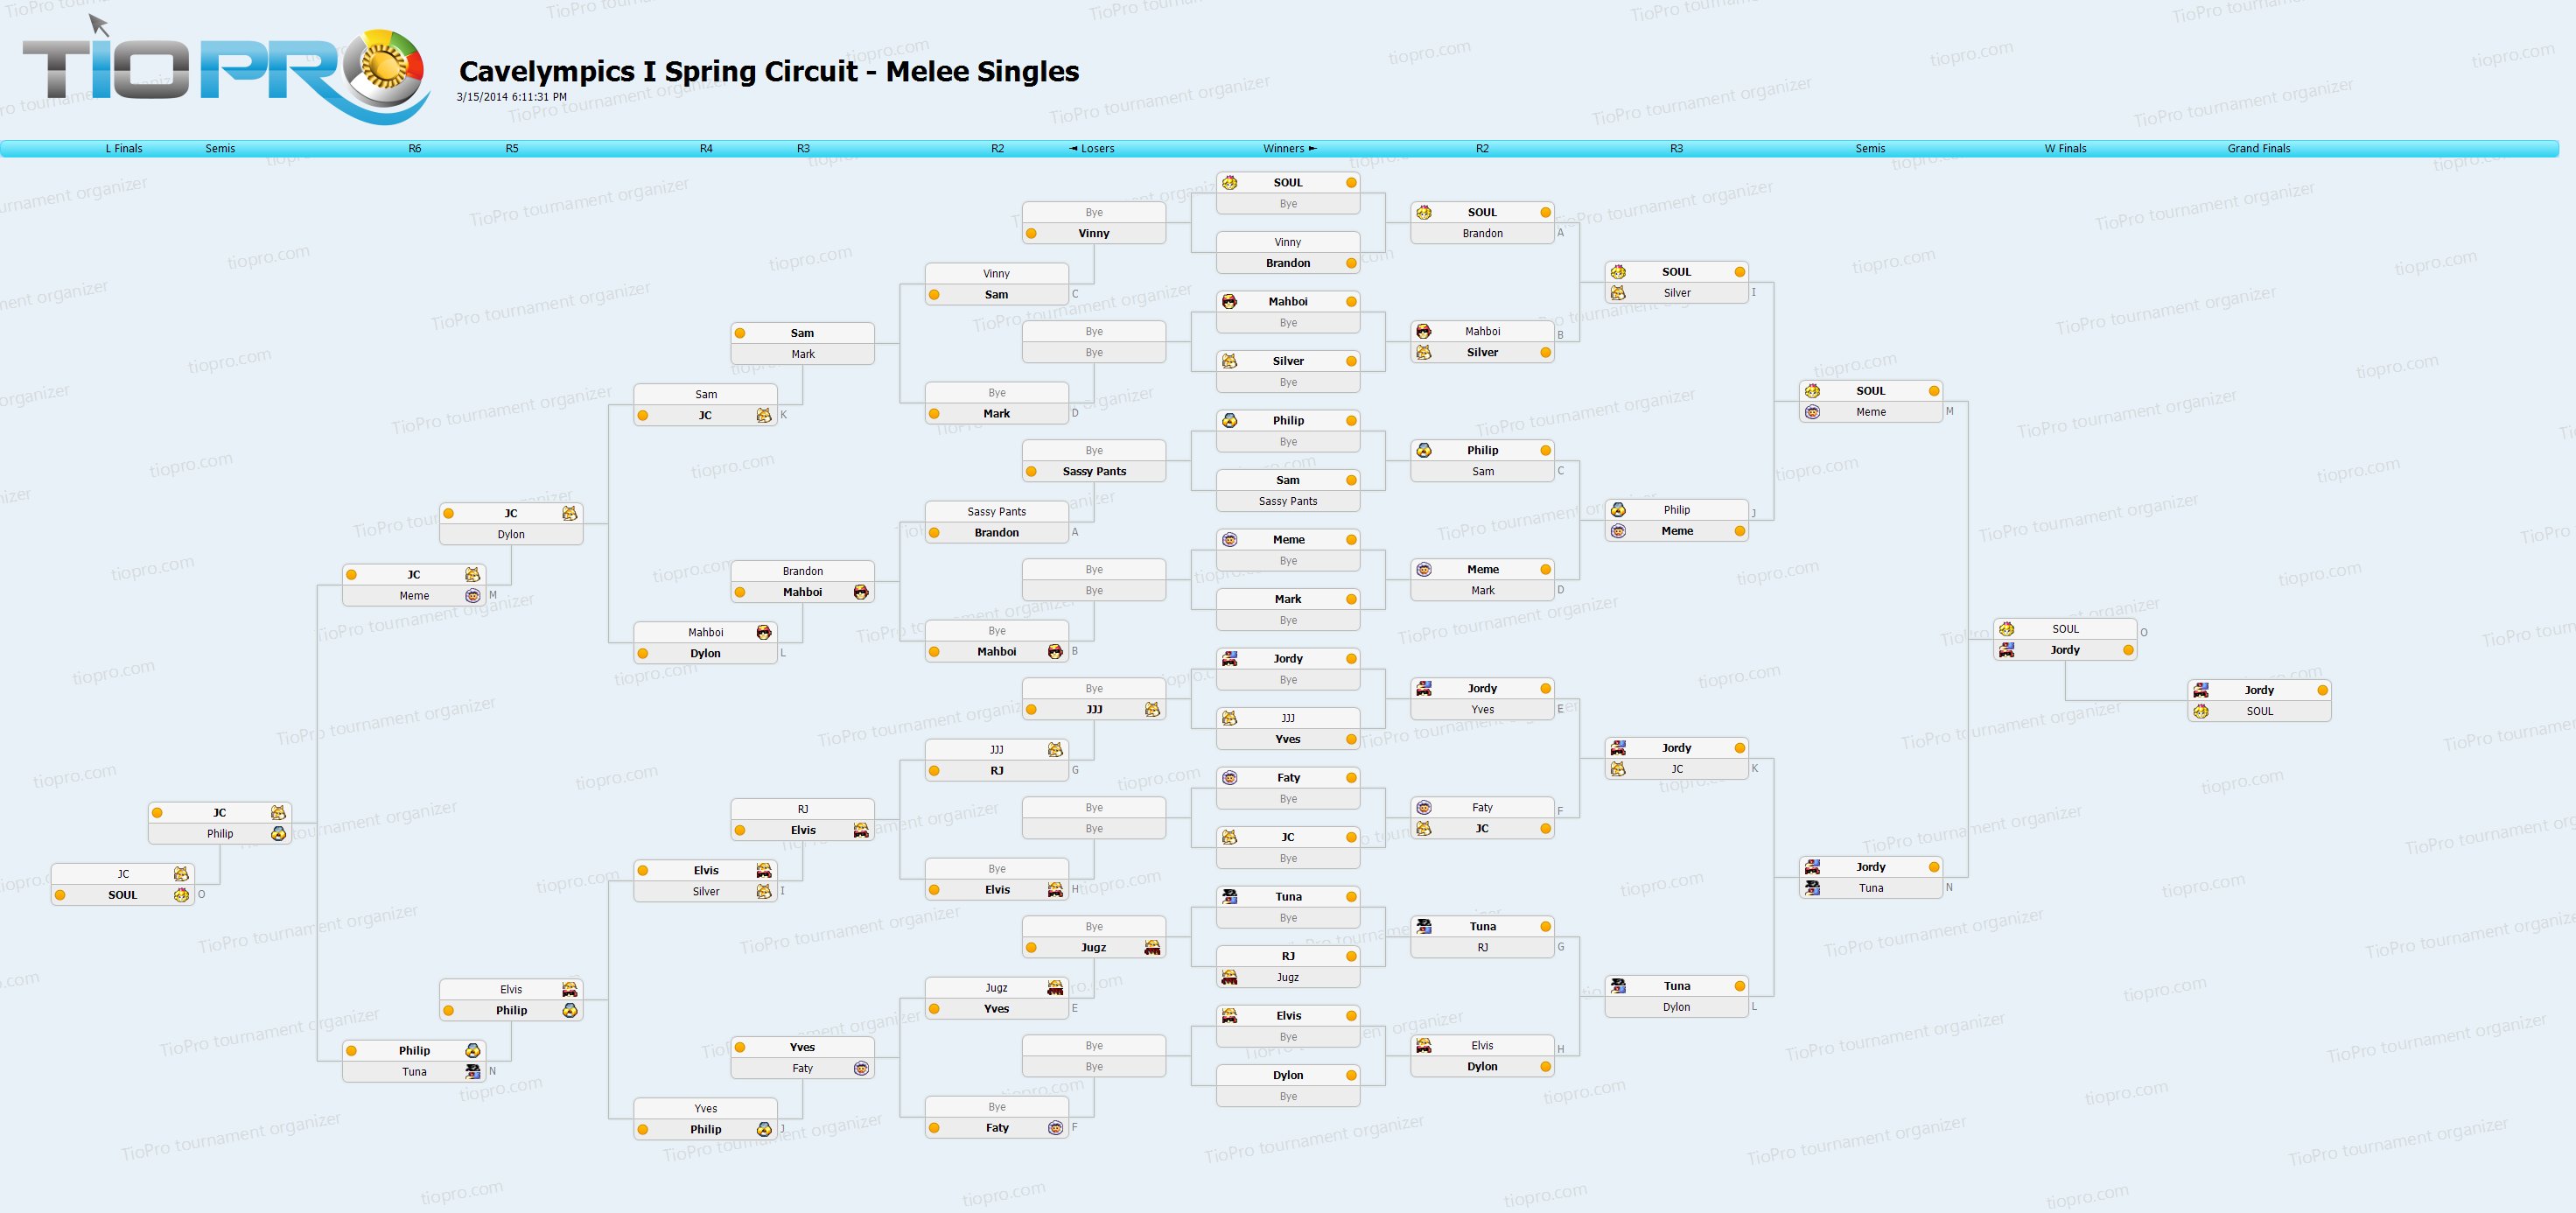 Cavelympics I Spring Circuit - Melee Singles